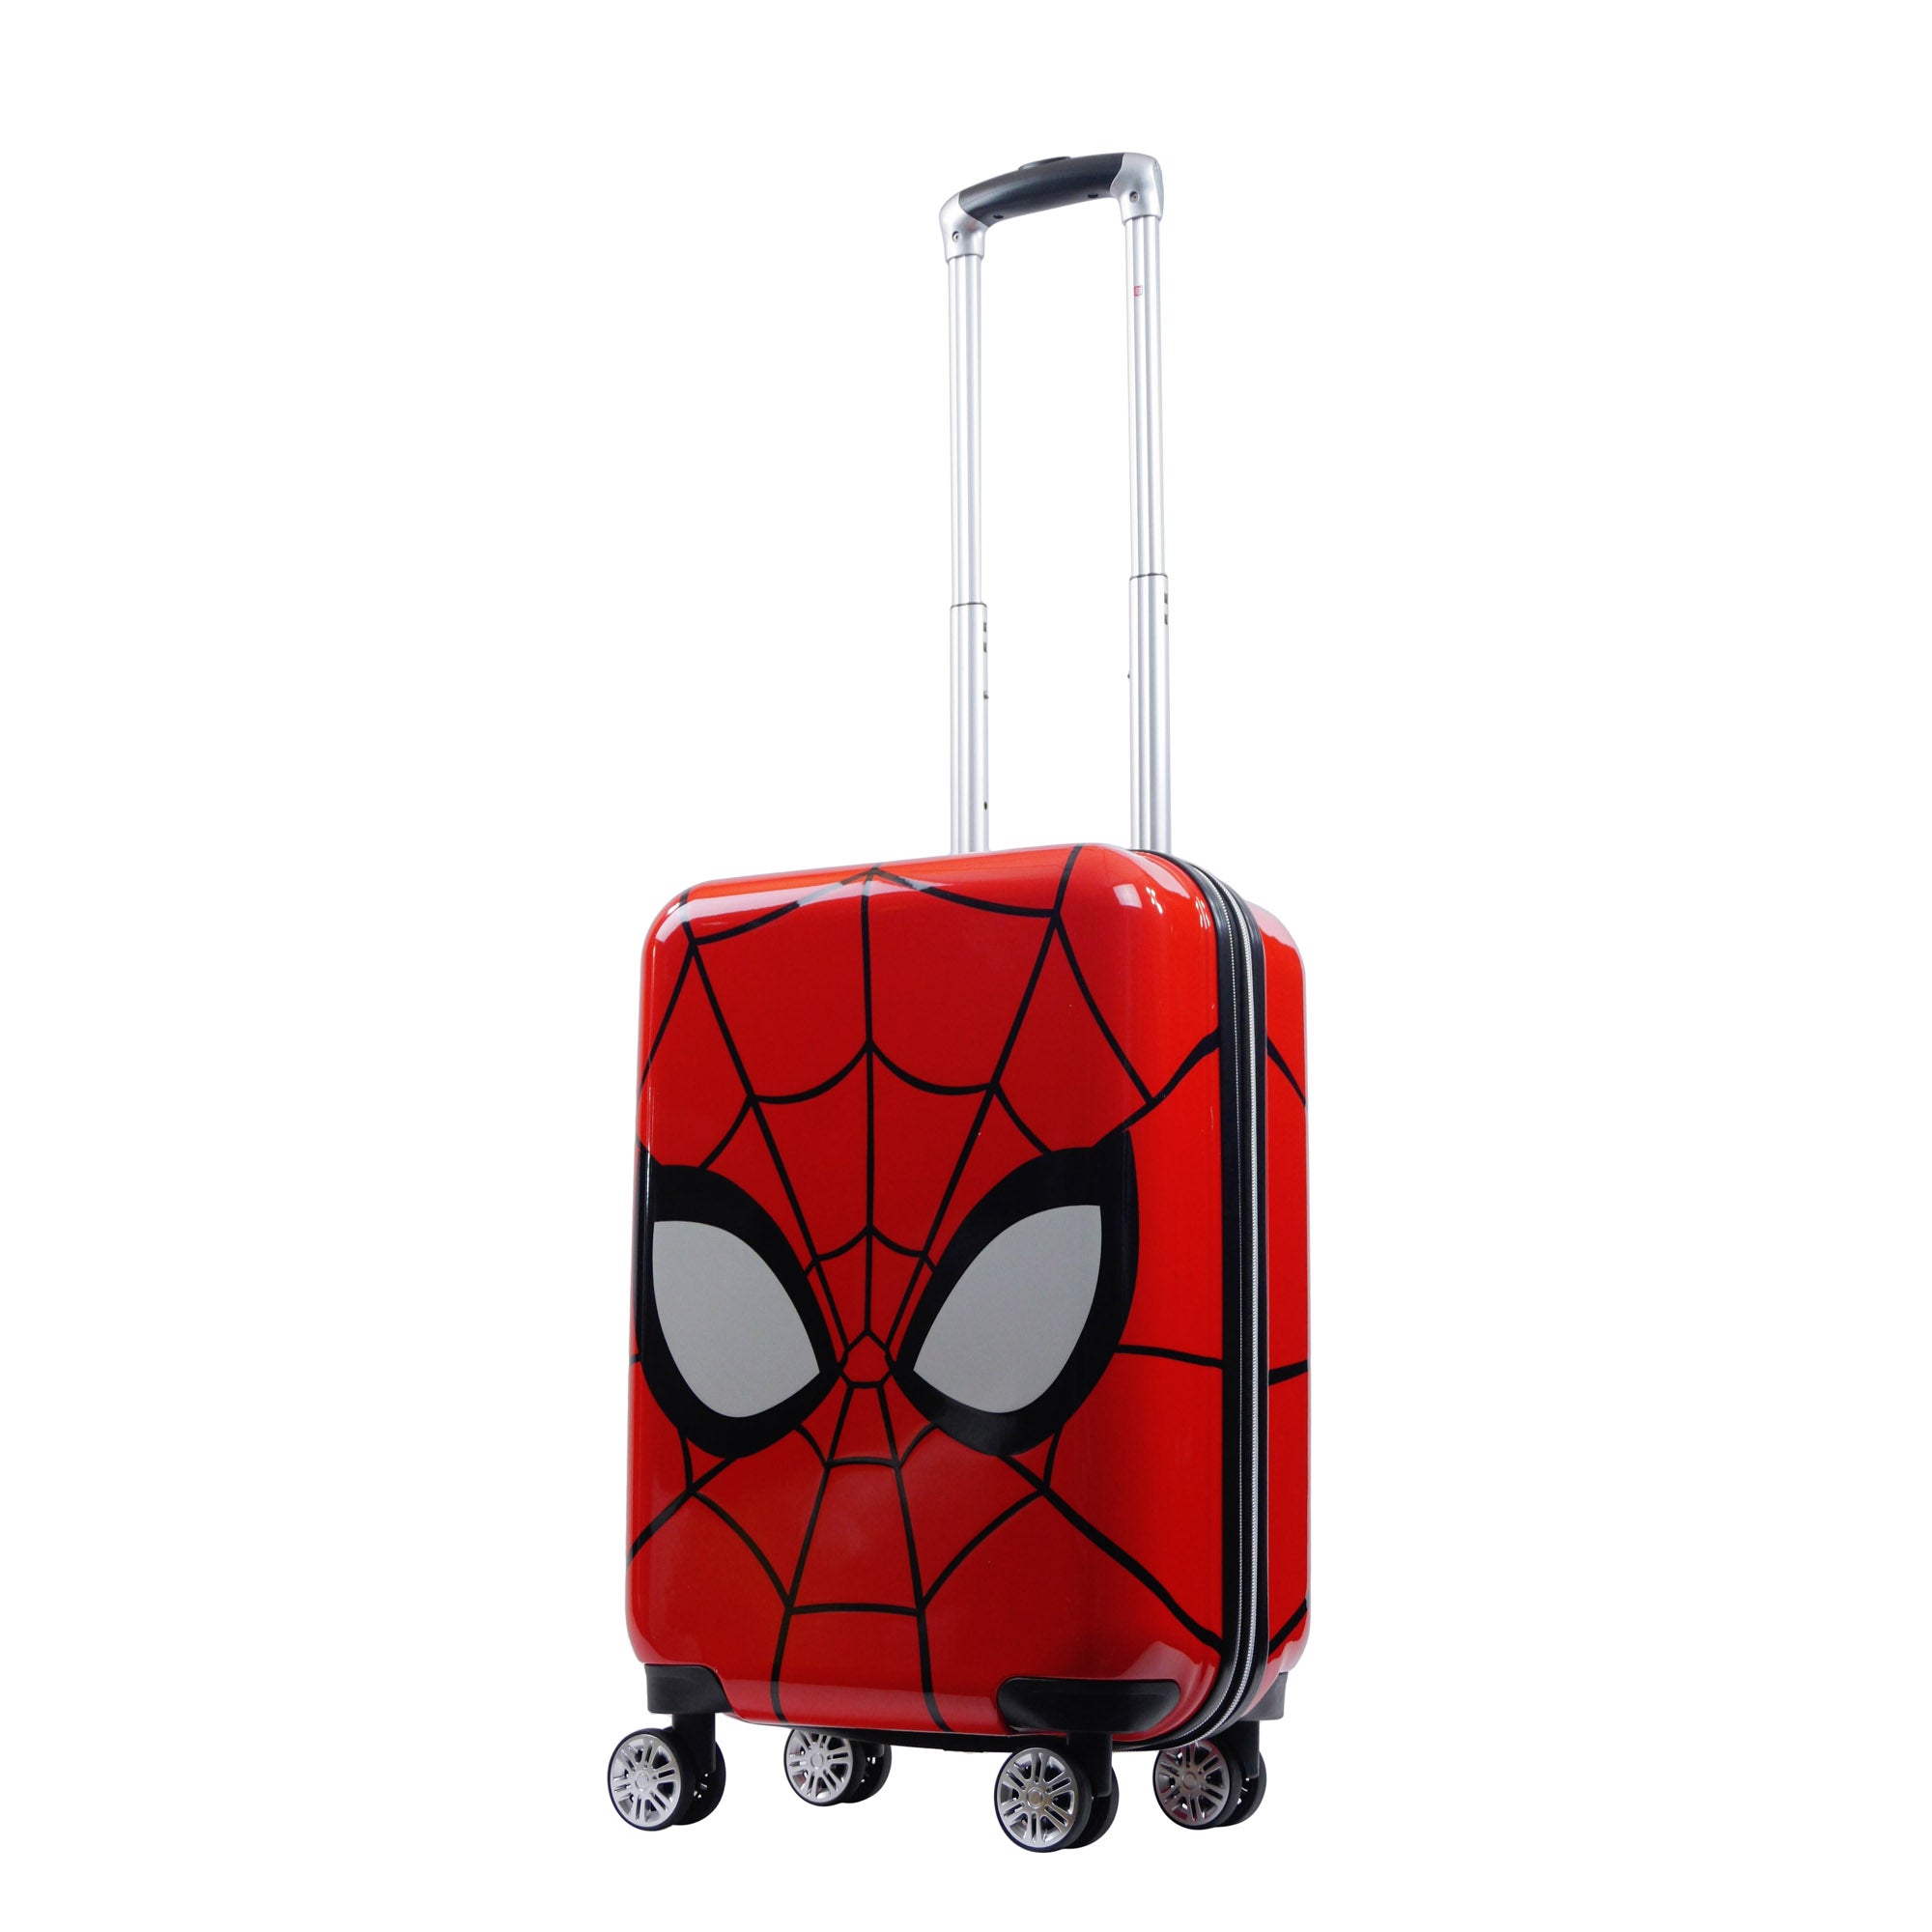 Marvel Spiderman Mask FŪL 21" Hard Rolling carry-on suitcase Luggage, Red-best suitcases for traveling